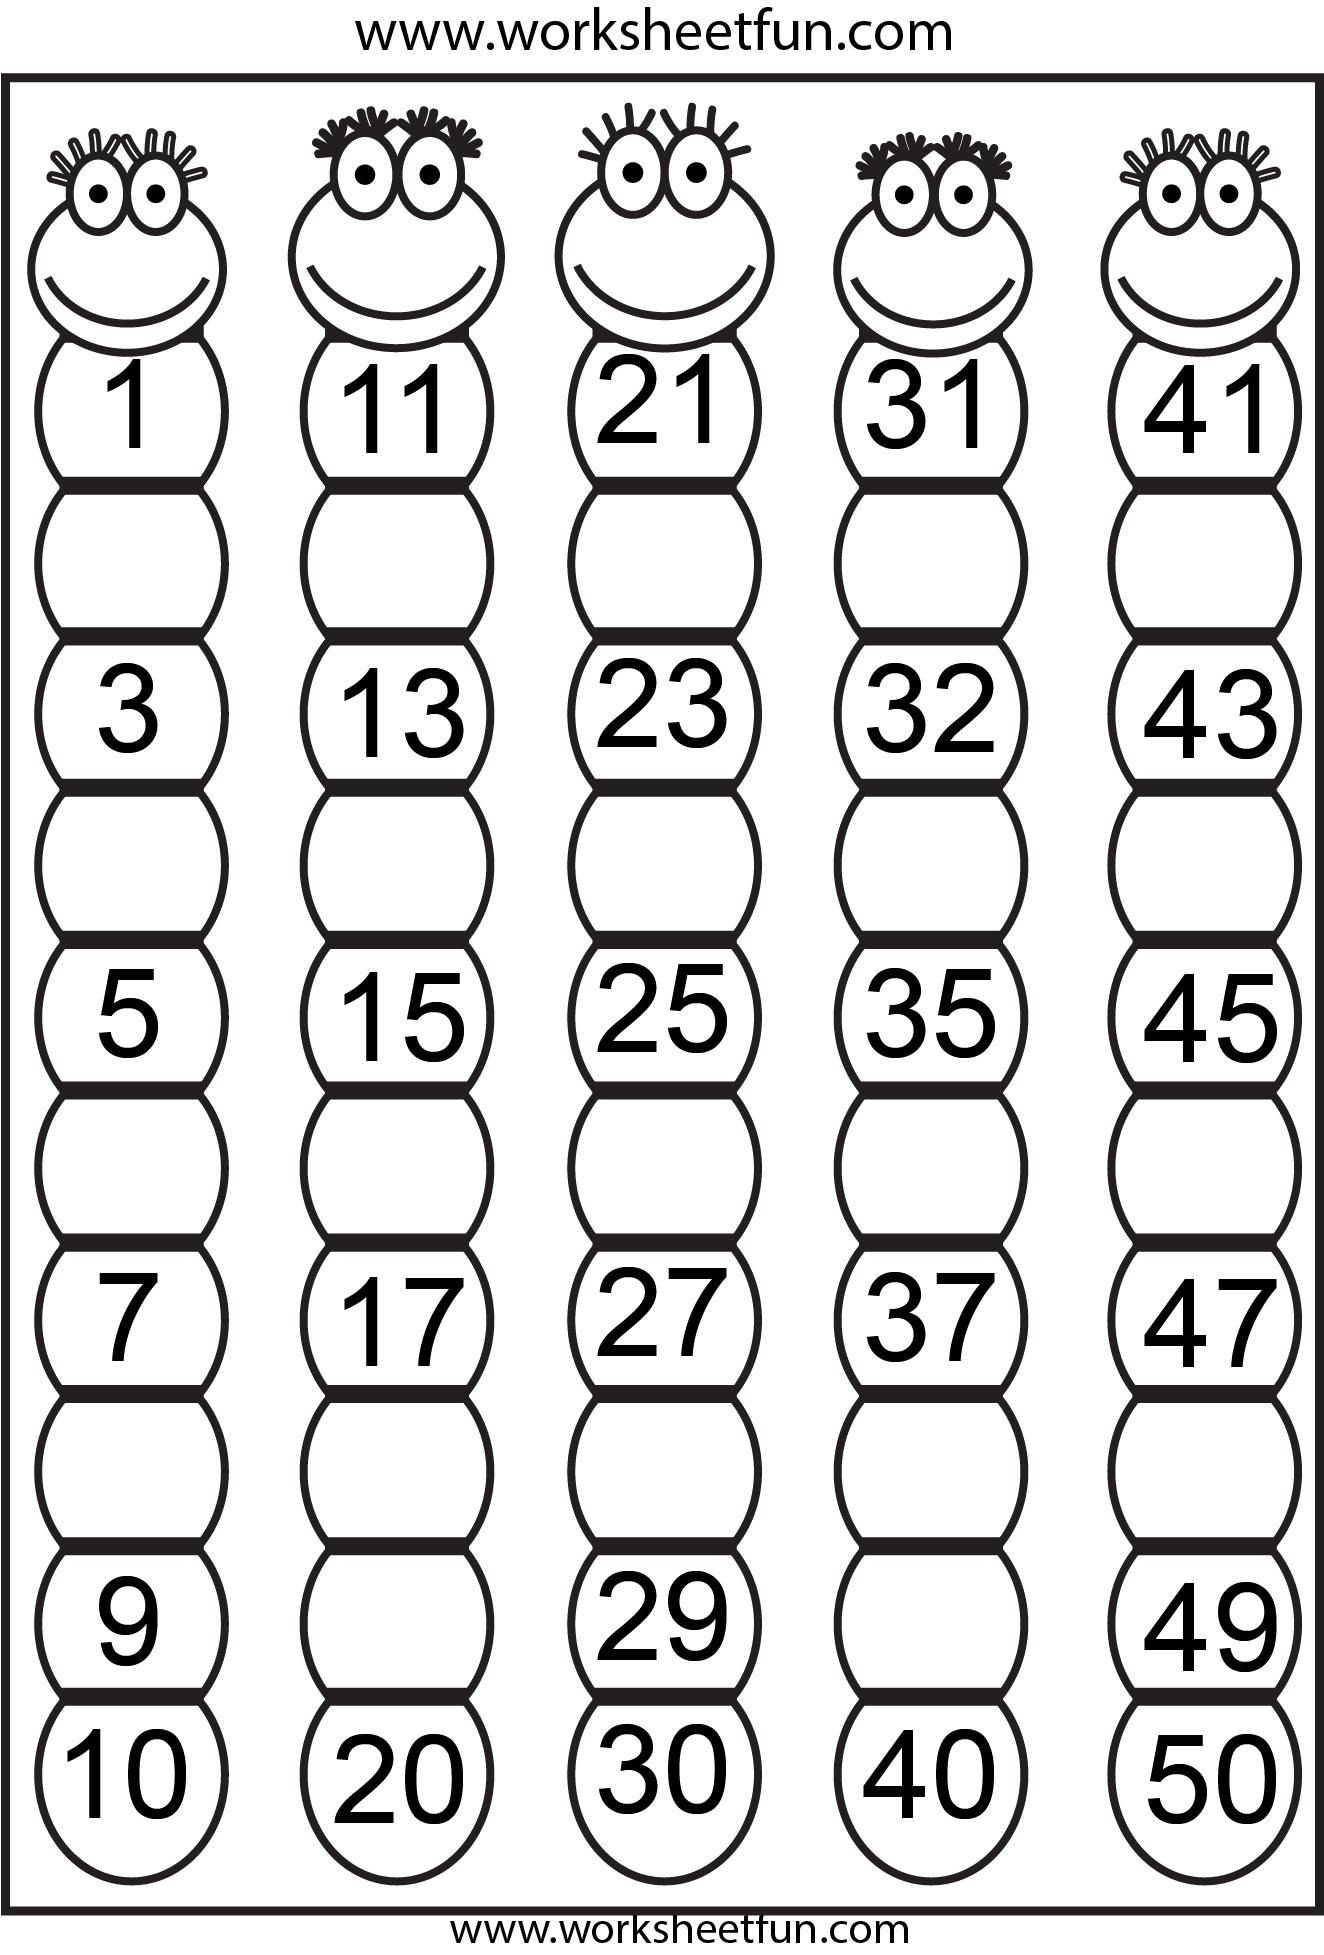 7 Best Images of Number Sheets 1 To 50 Printable